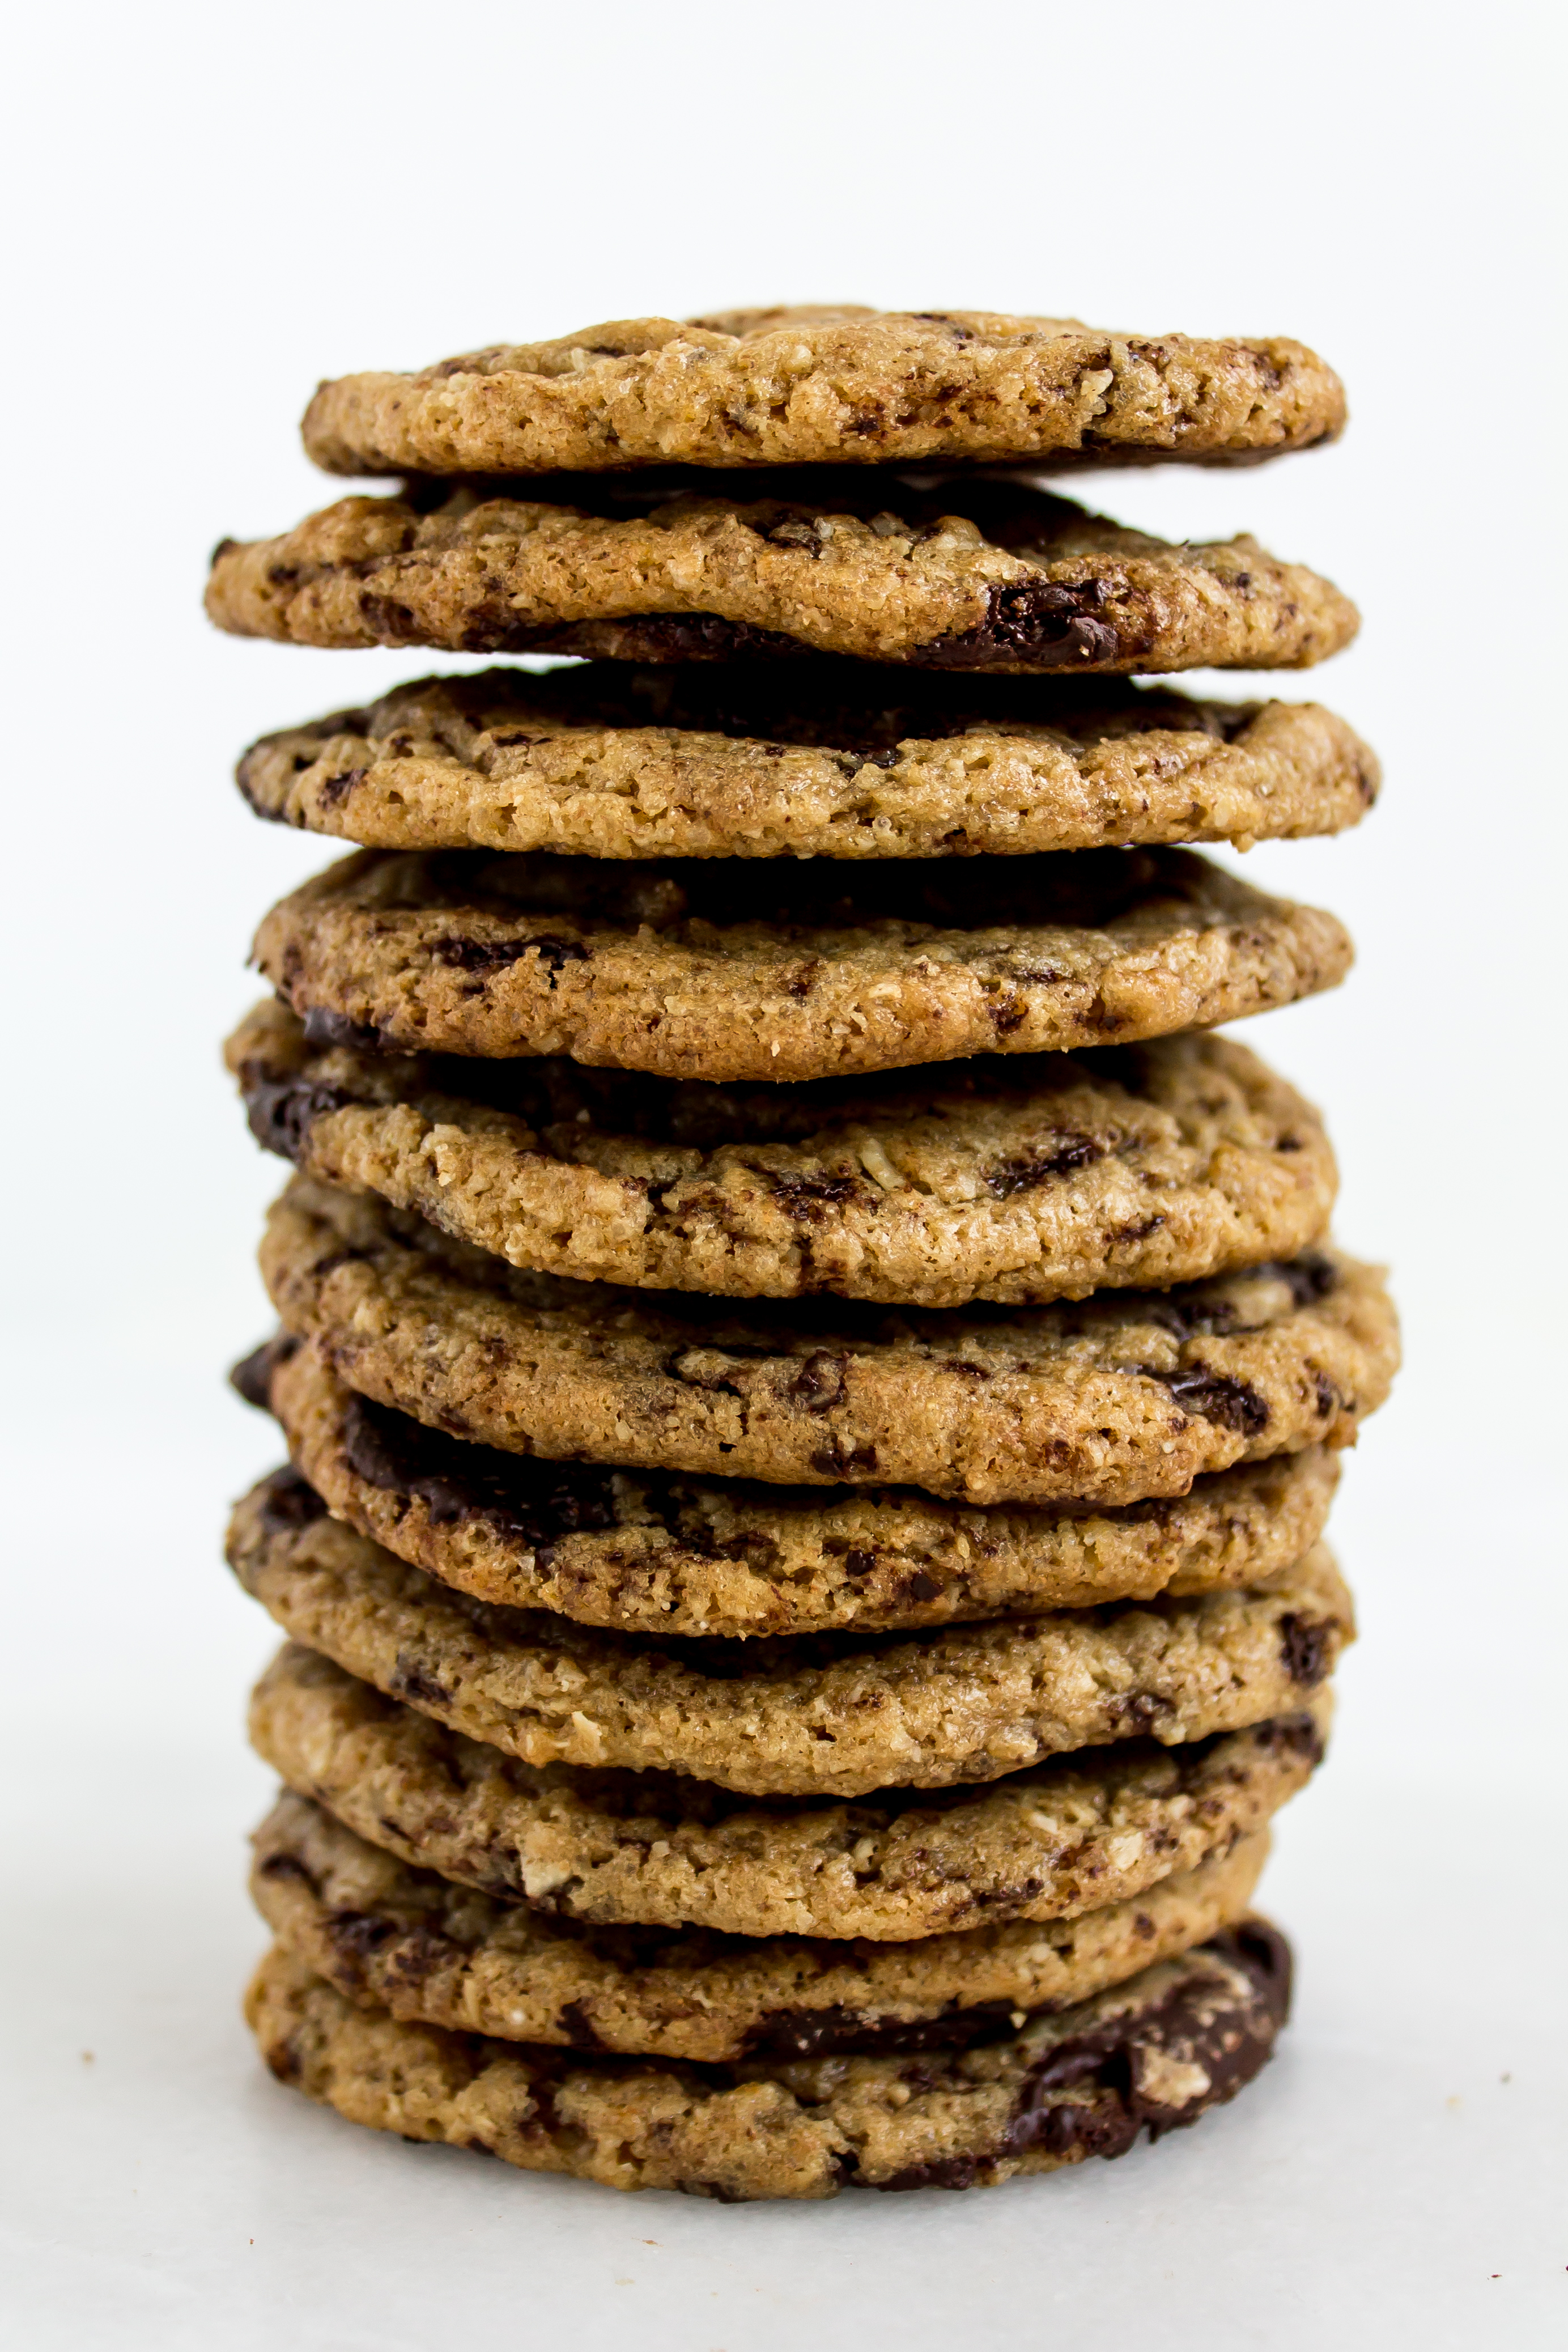 Spelt chocolate chip cookies are a unique twist on the classic chocolate chip cookie. With a nutty flavor, dark chocolate chunks, and that sweet and salty combination, they are a delicious treat. | www.passthecookies.com